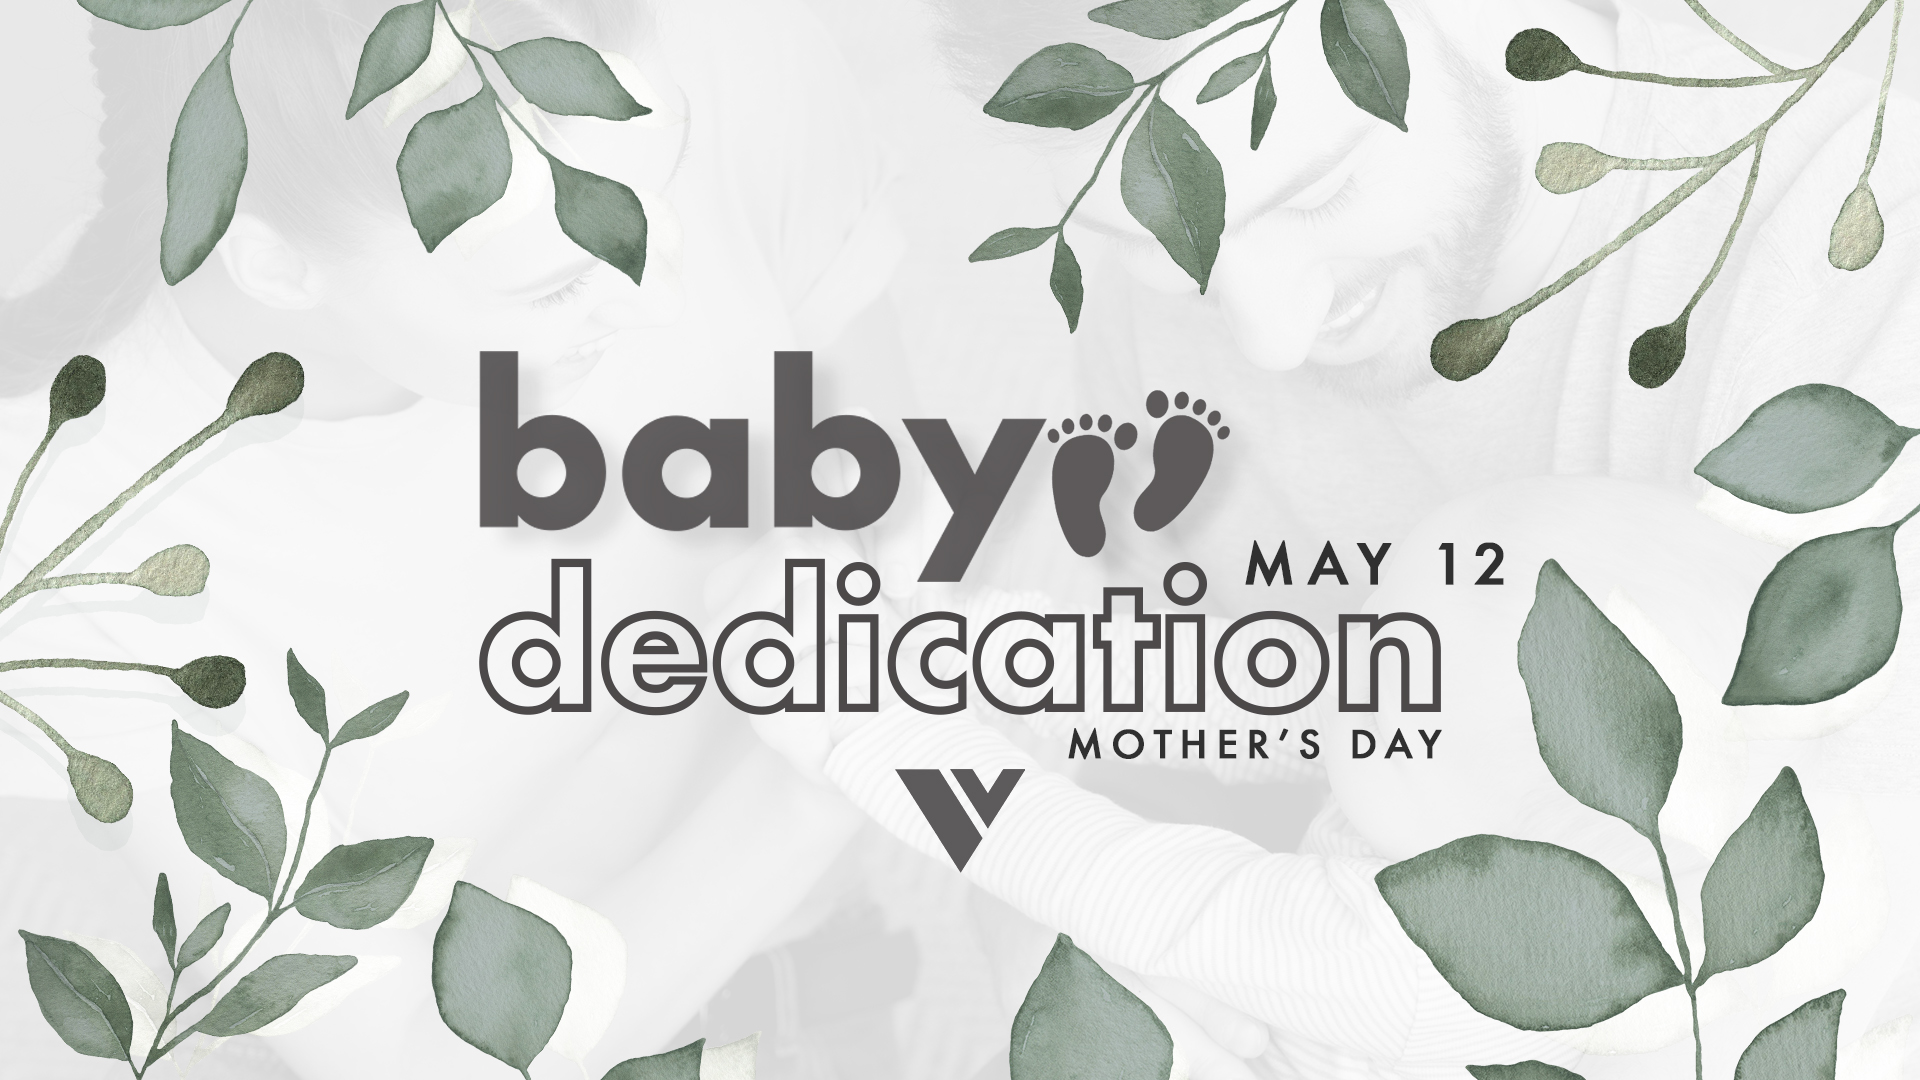 Baby Dedication Sunday - May 12 (Mother's Day)